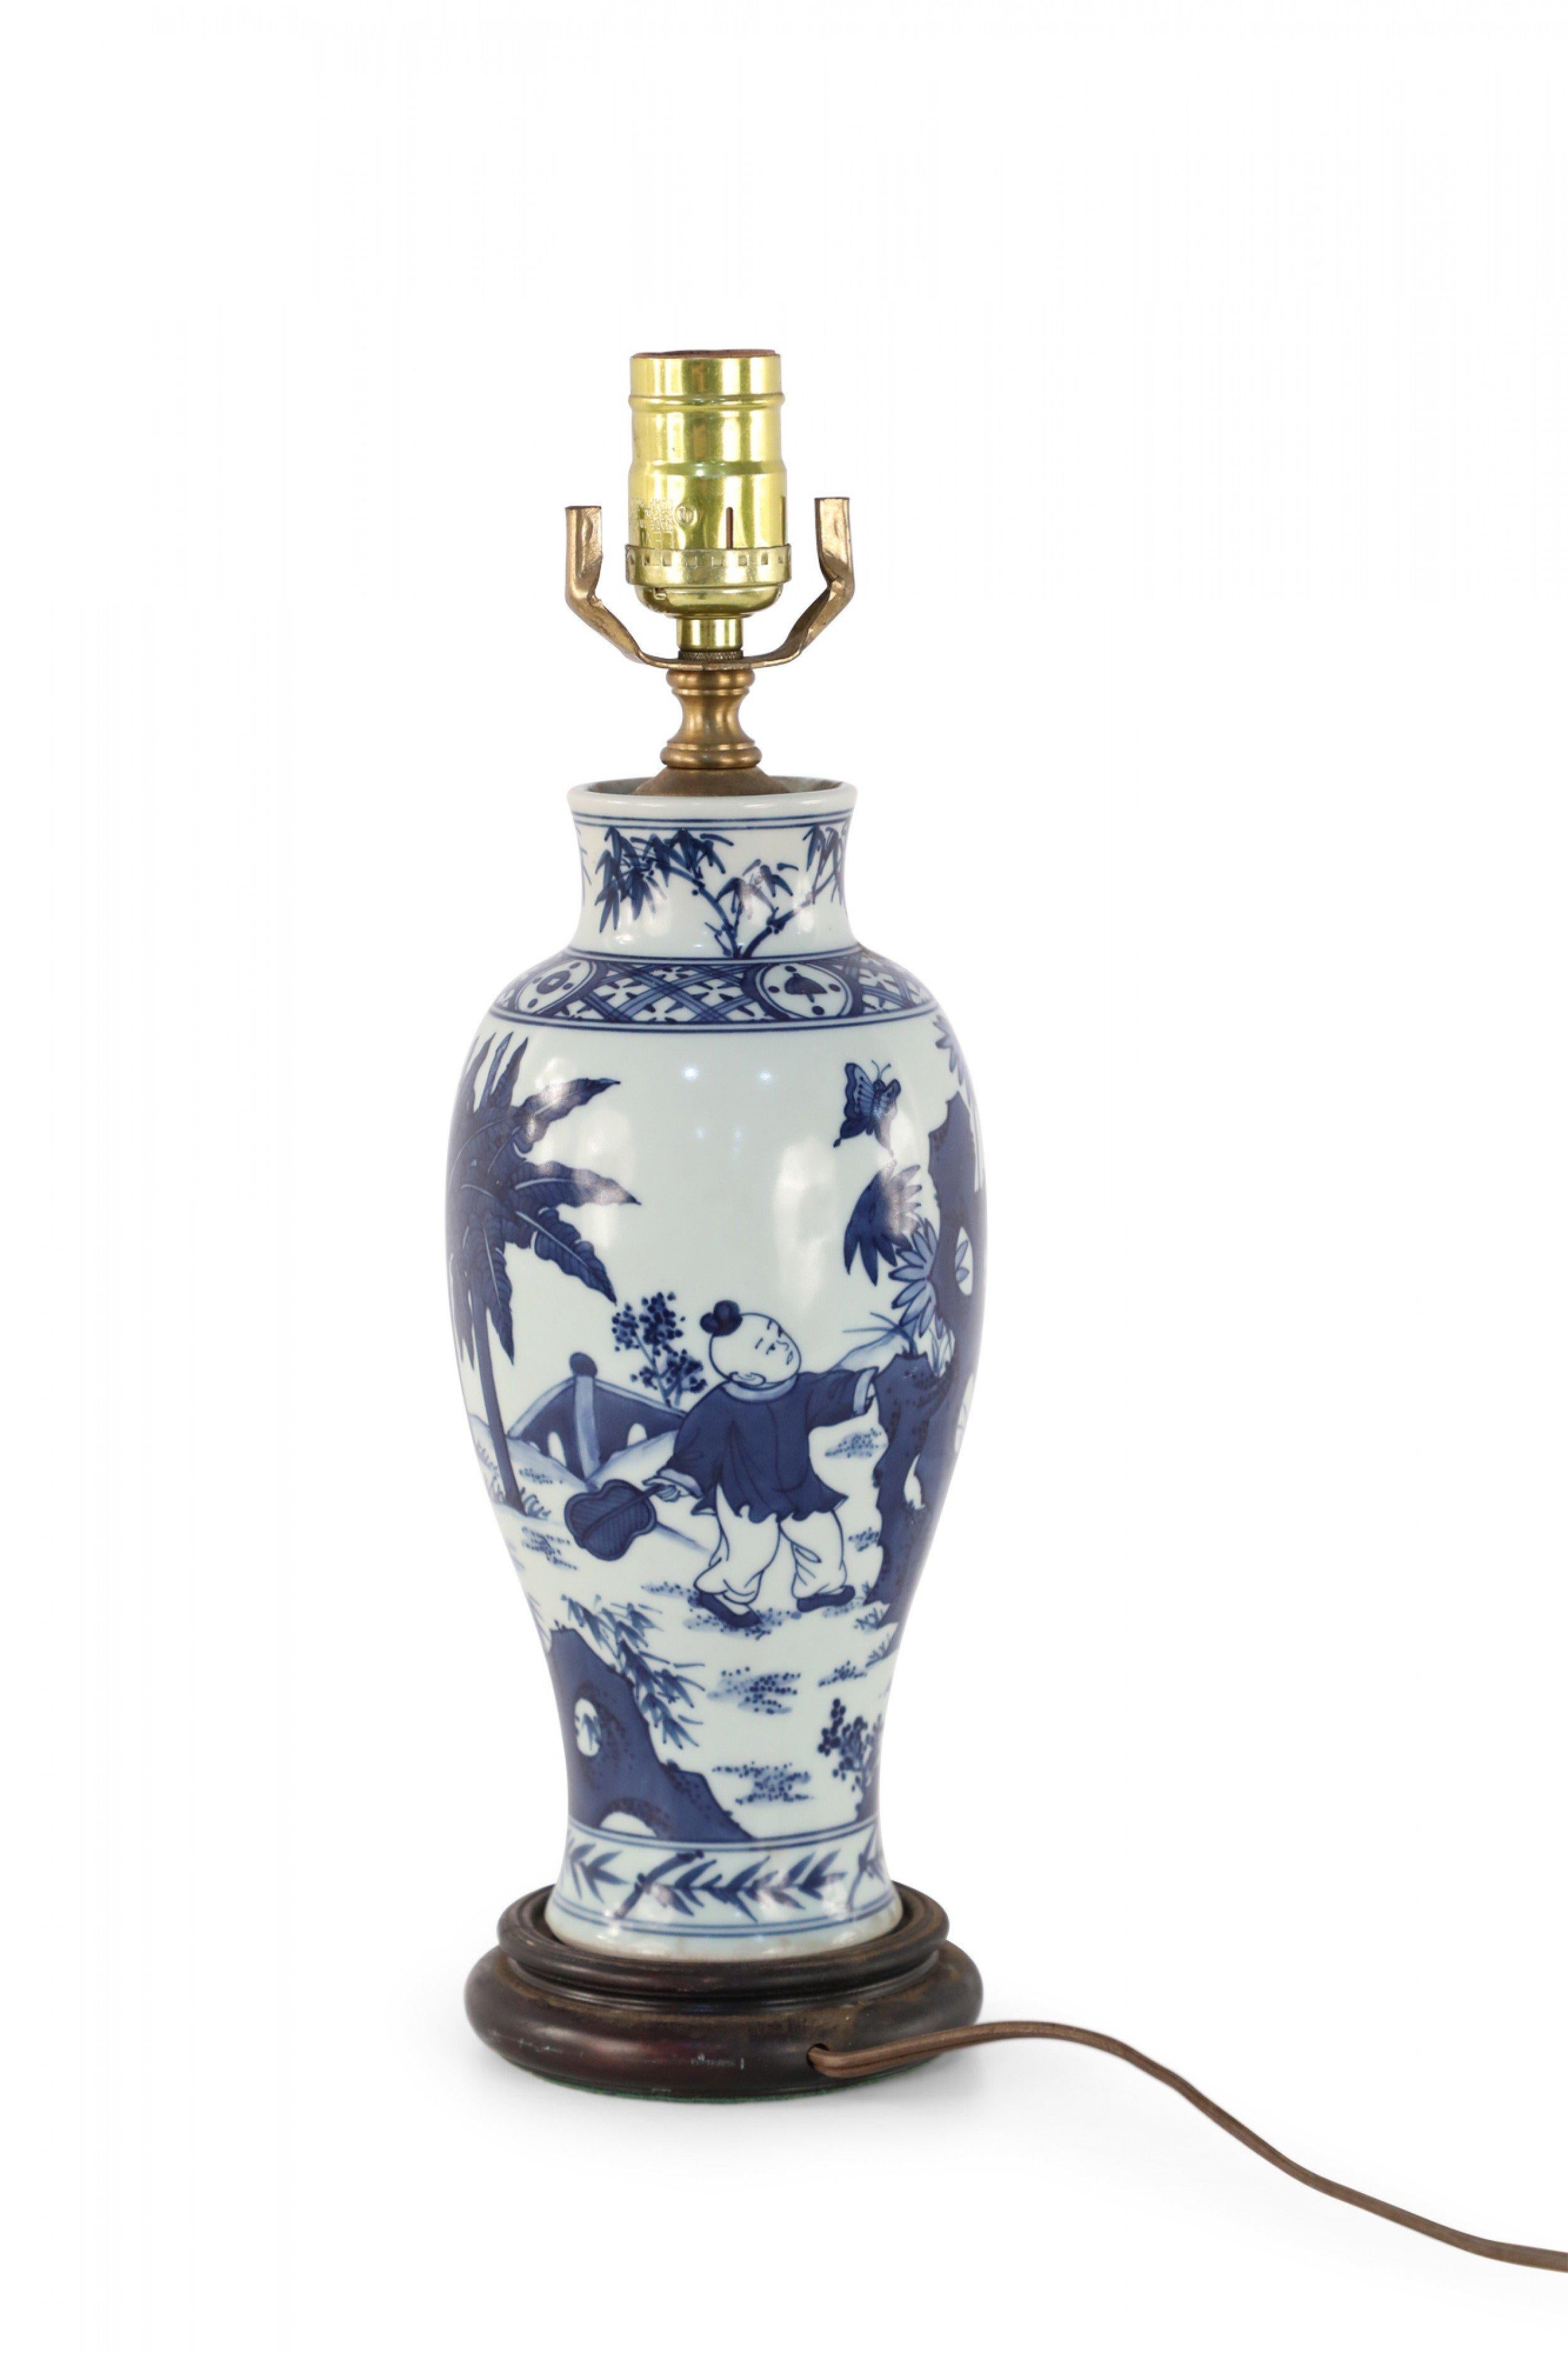 Antique Chinese (Early 20th Century) table lamp made from a white and blue baluster-shaped porcelain vase depicting a mother and children playing outside, mounted on a wooden base with brass hardware.
 